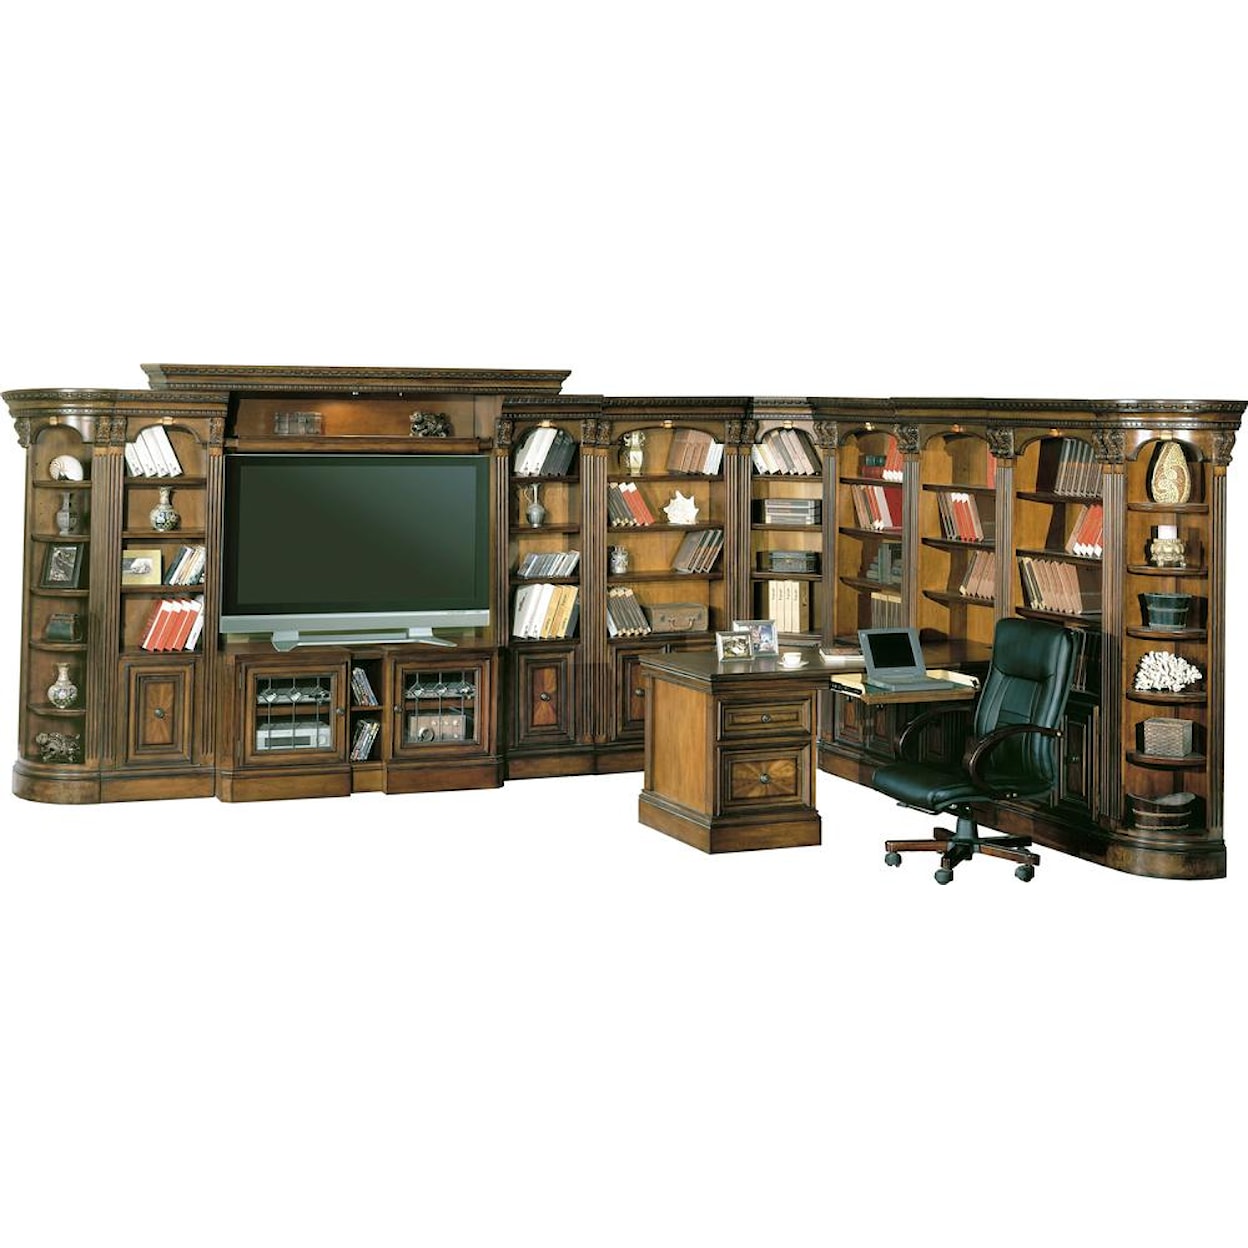 Paramount Furniture Huntington Large Wall Unit Home Office